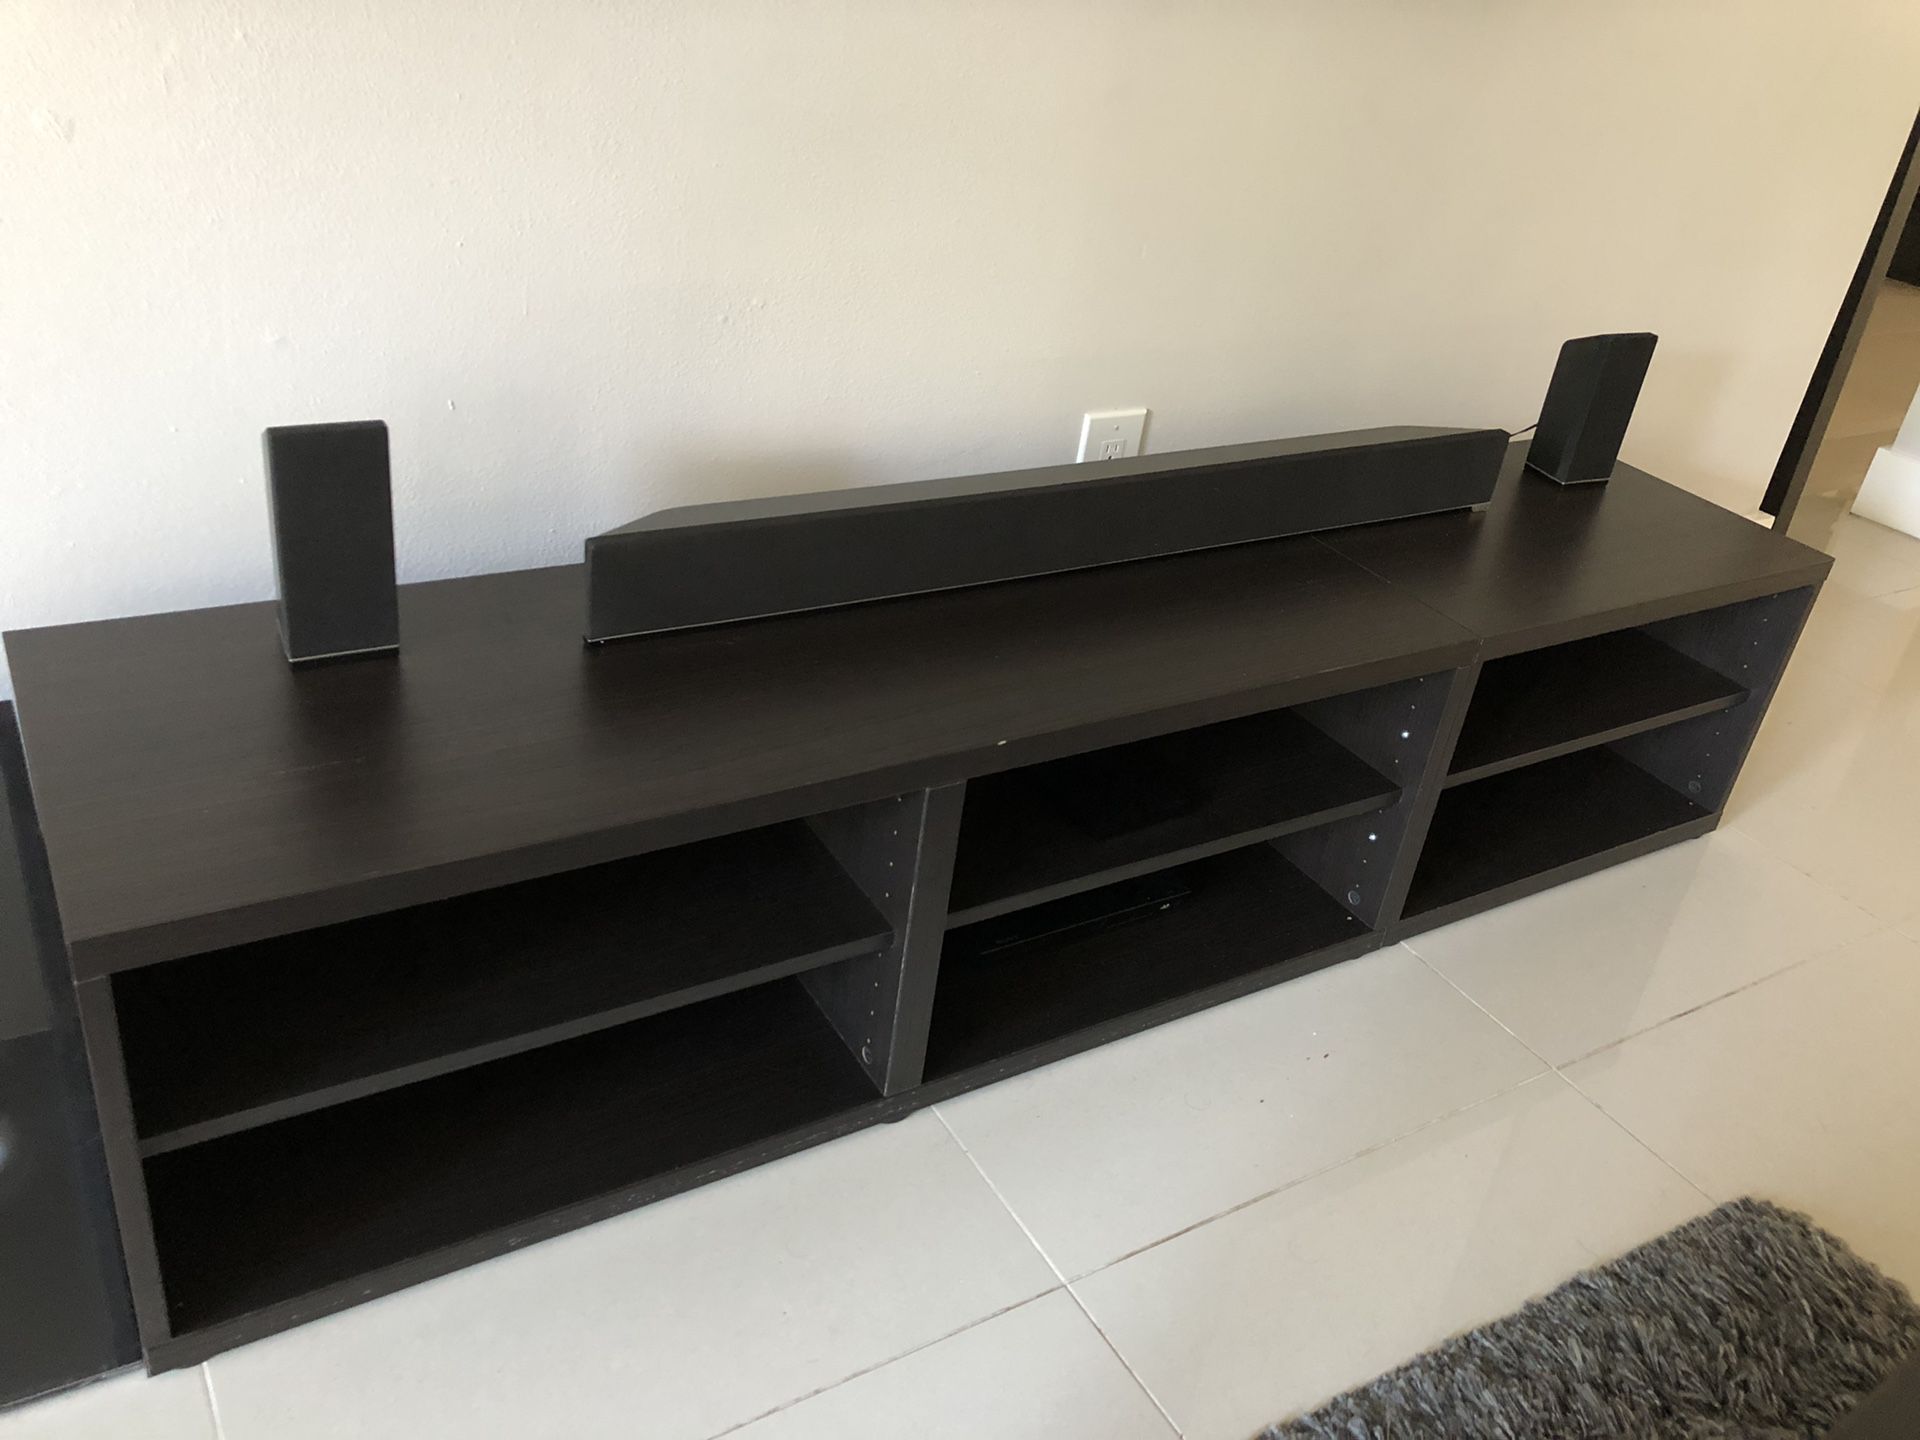 IKEA Besta TV Stand black/brown 70 inches long